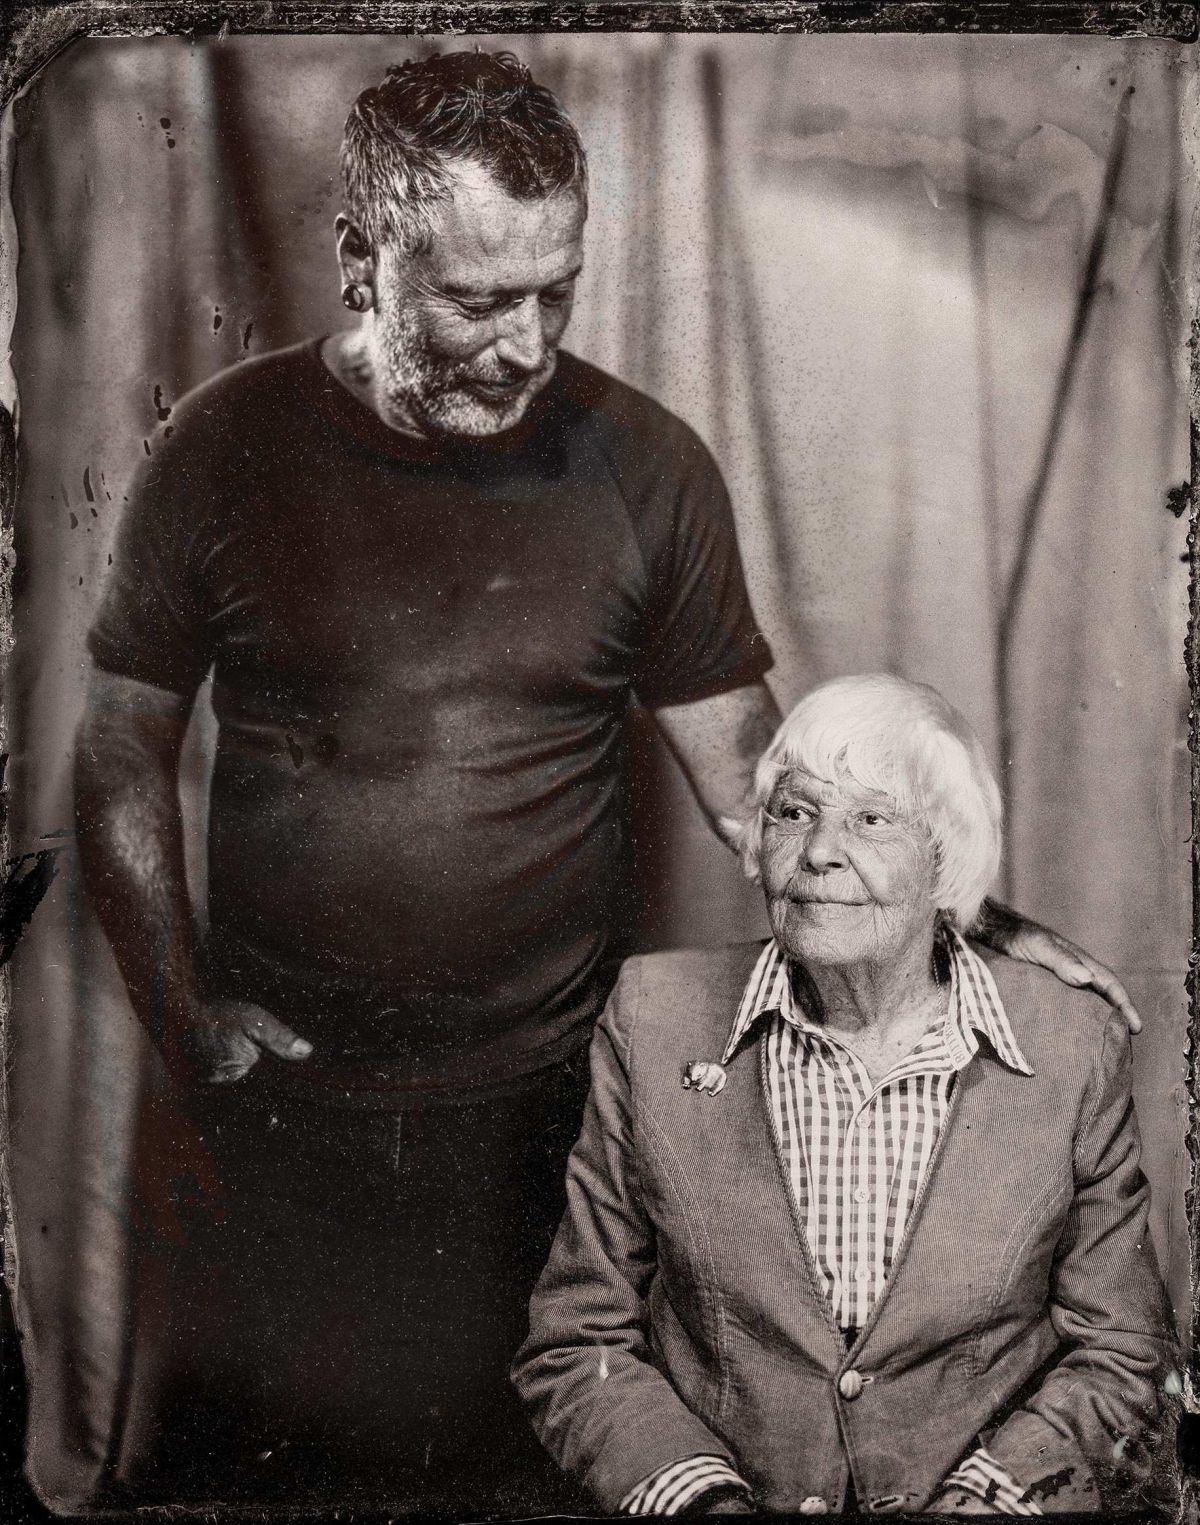 Tintype of man standing next to seated woman